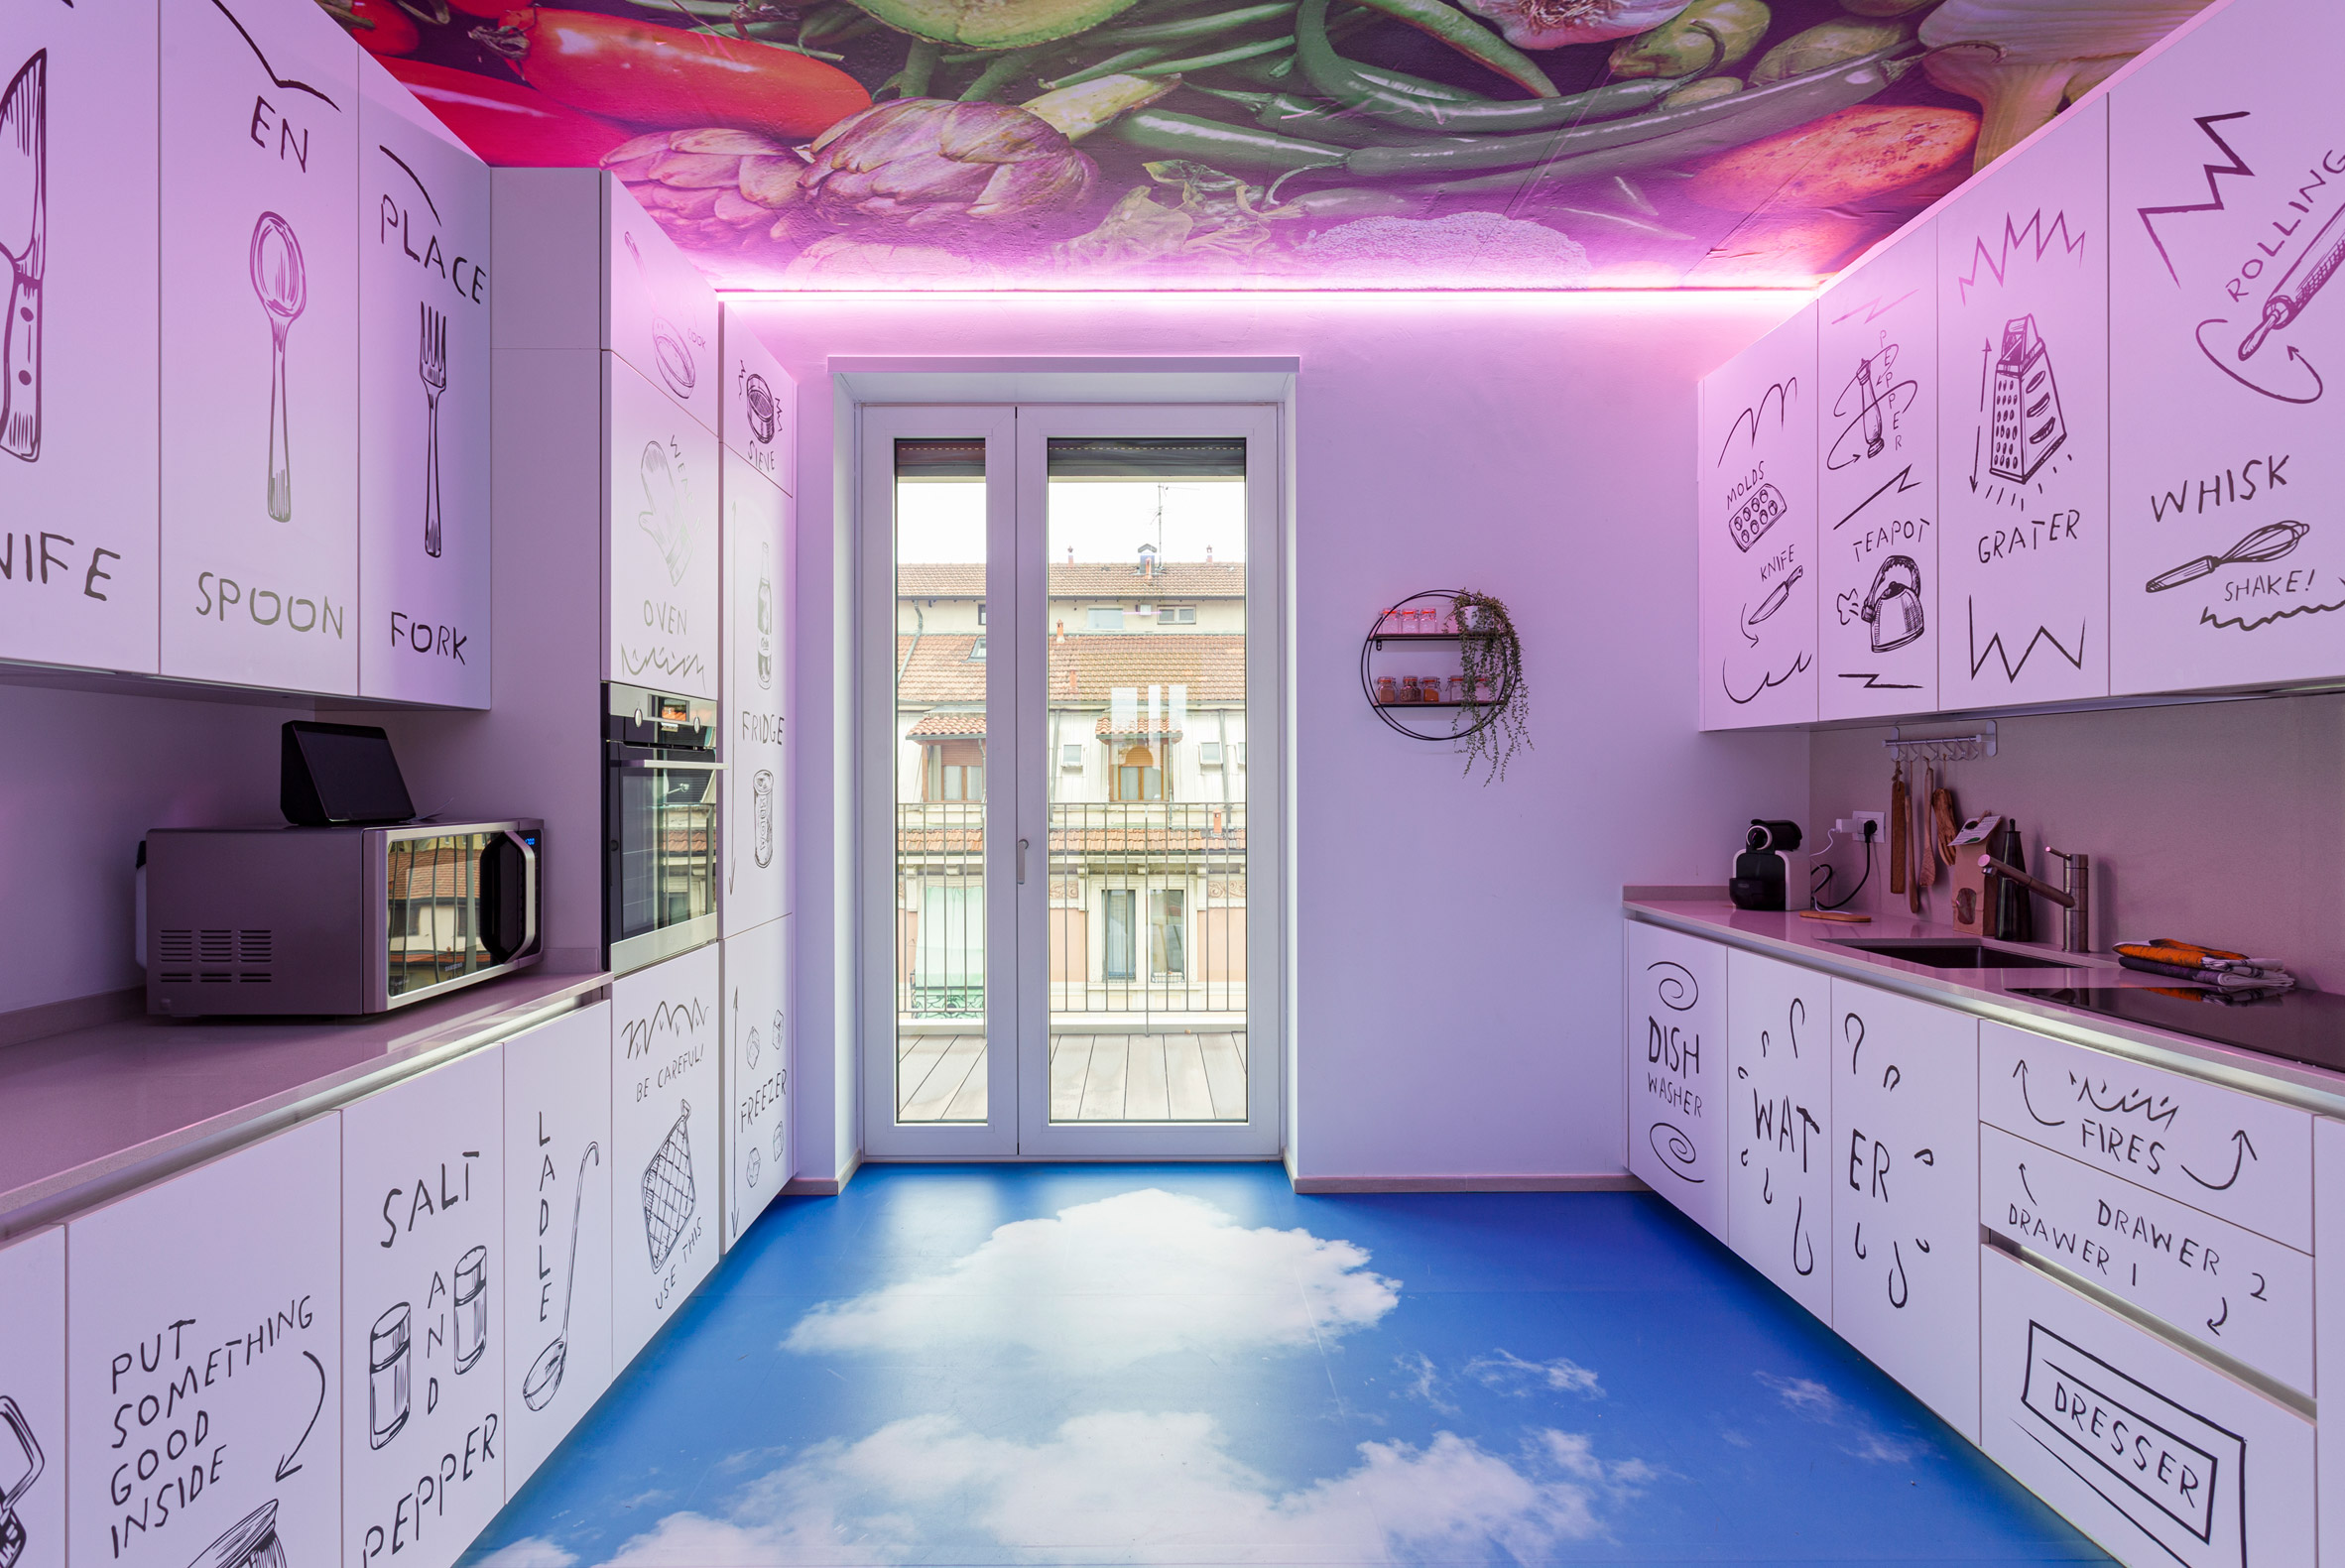 Kitchen of Defhouse for influencers in Milan